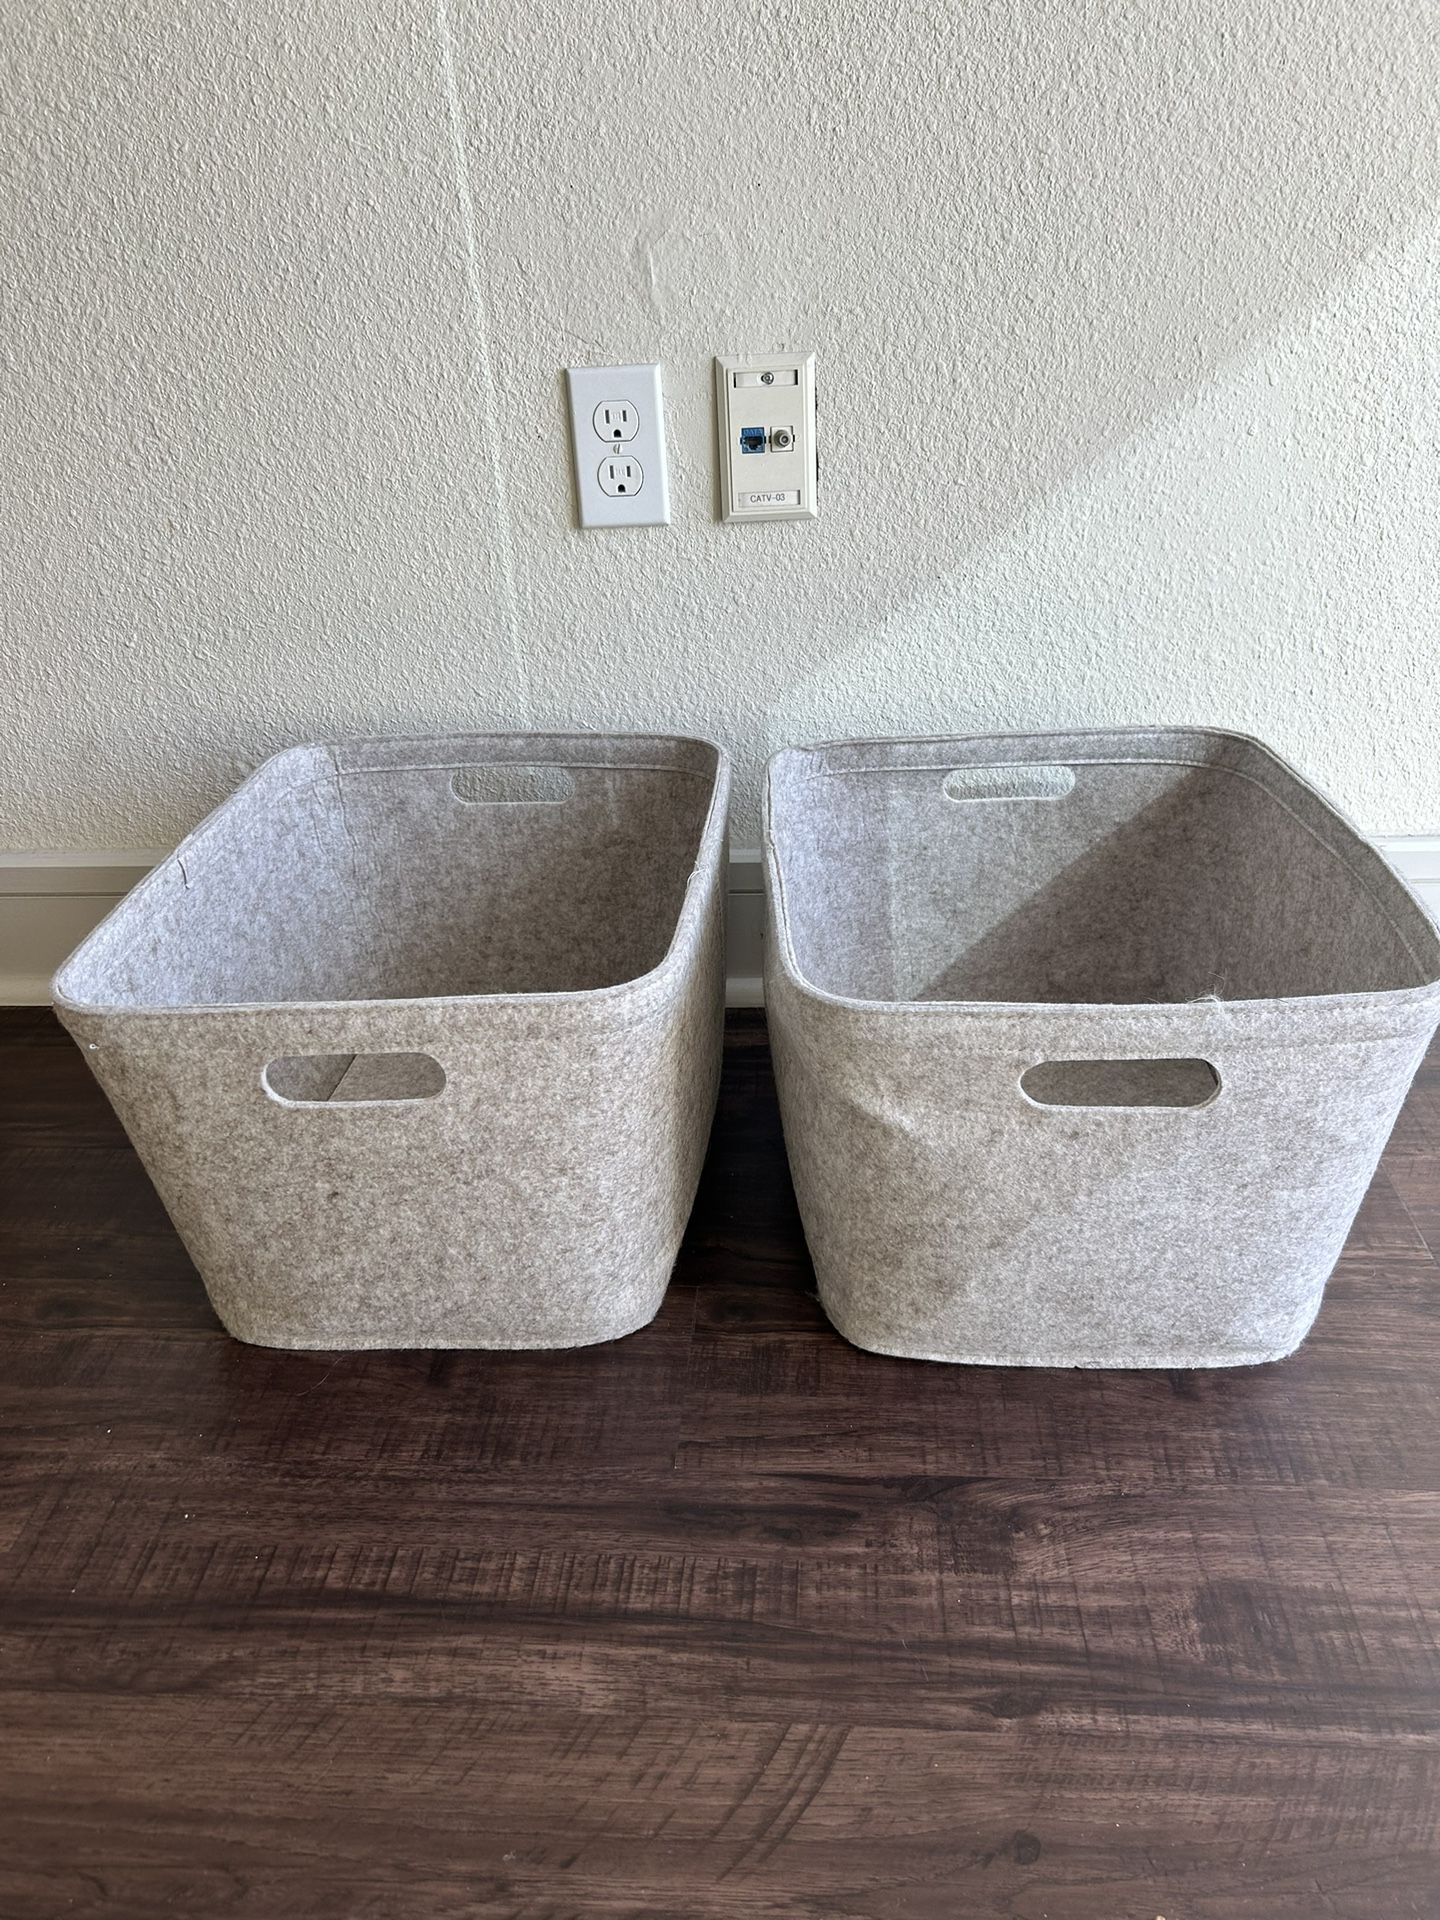 Large Felt Storage Containers From Target